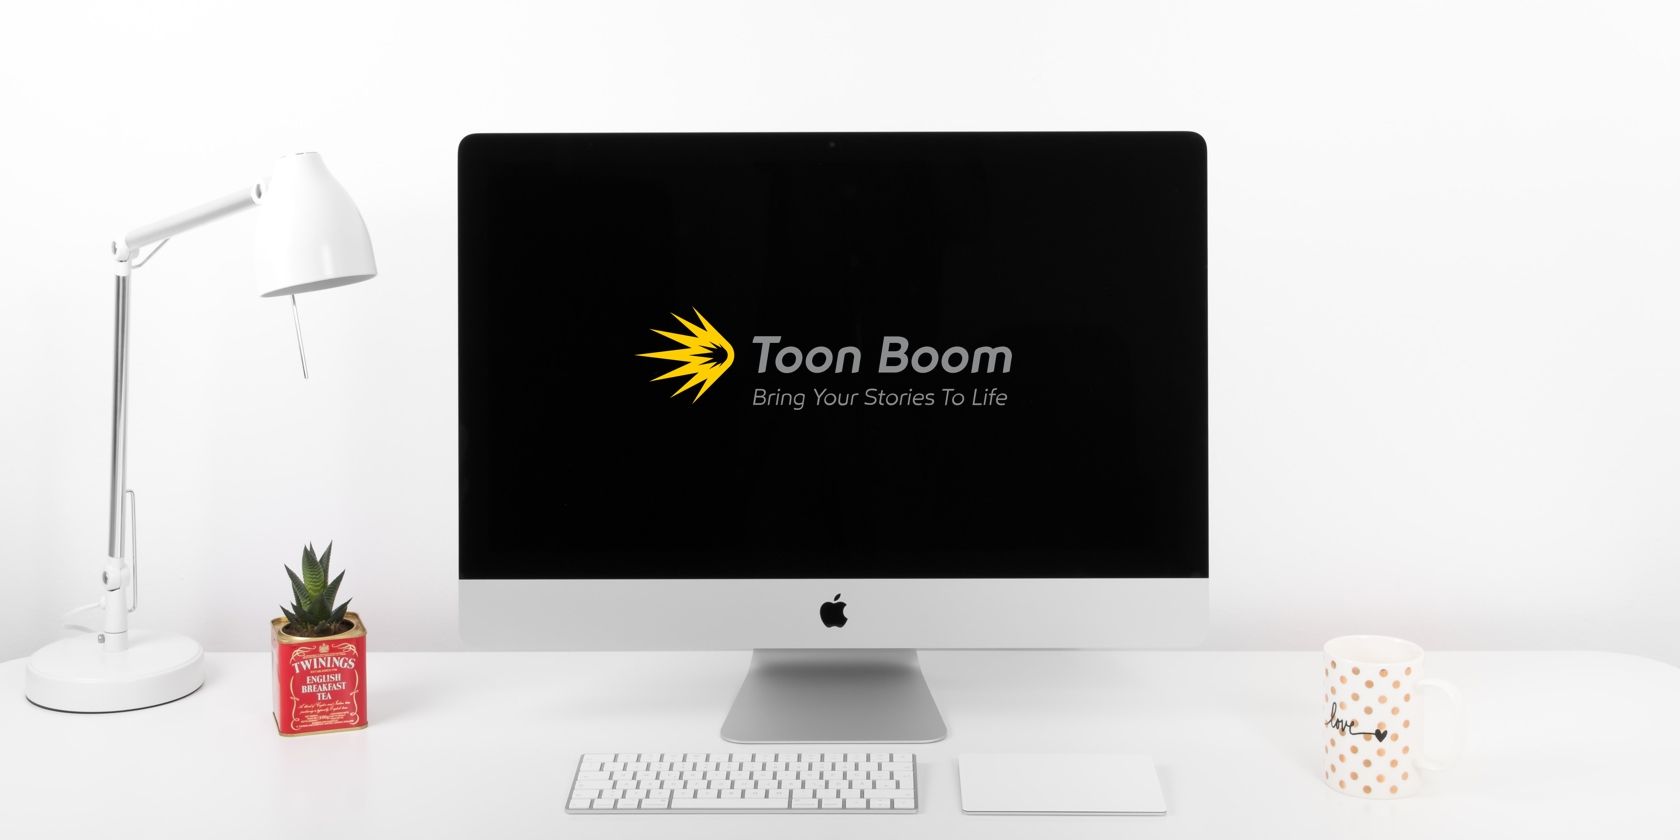 A computer with the Toon Boom logo on it.